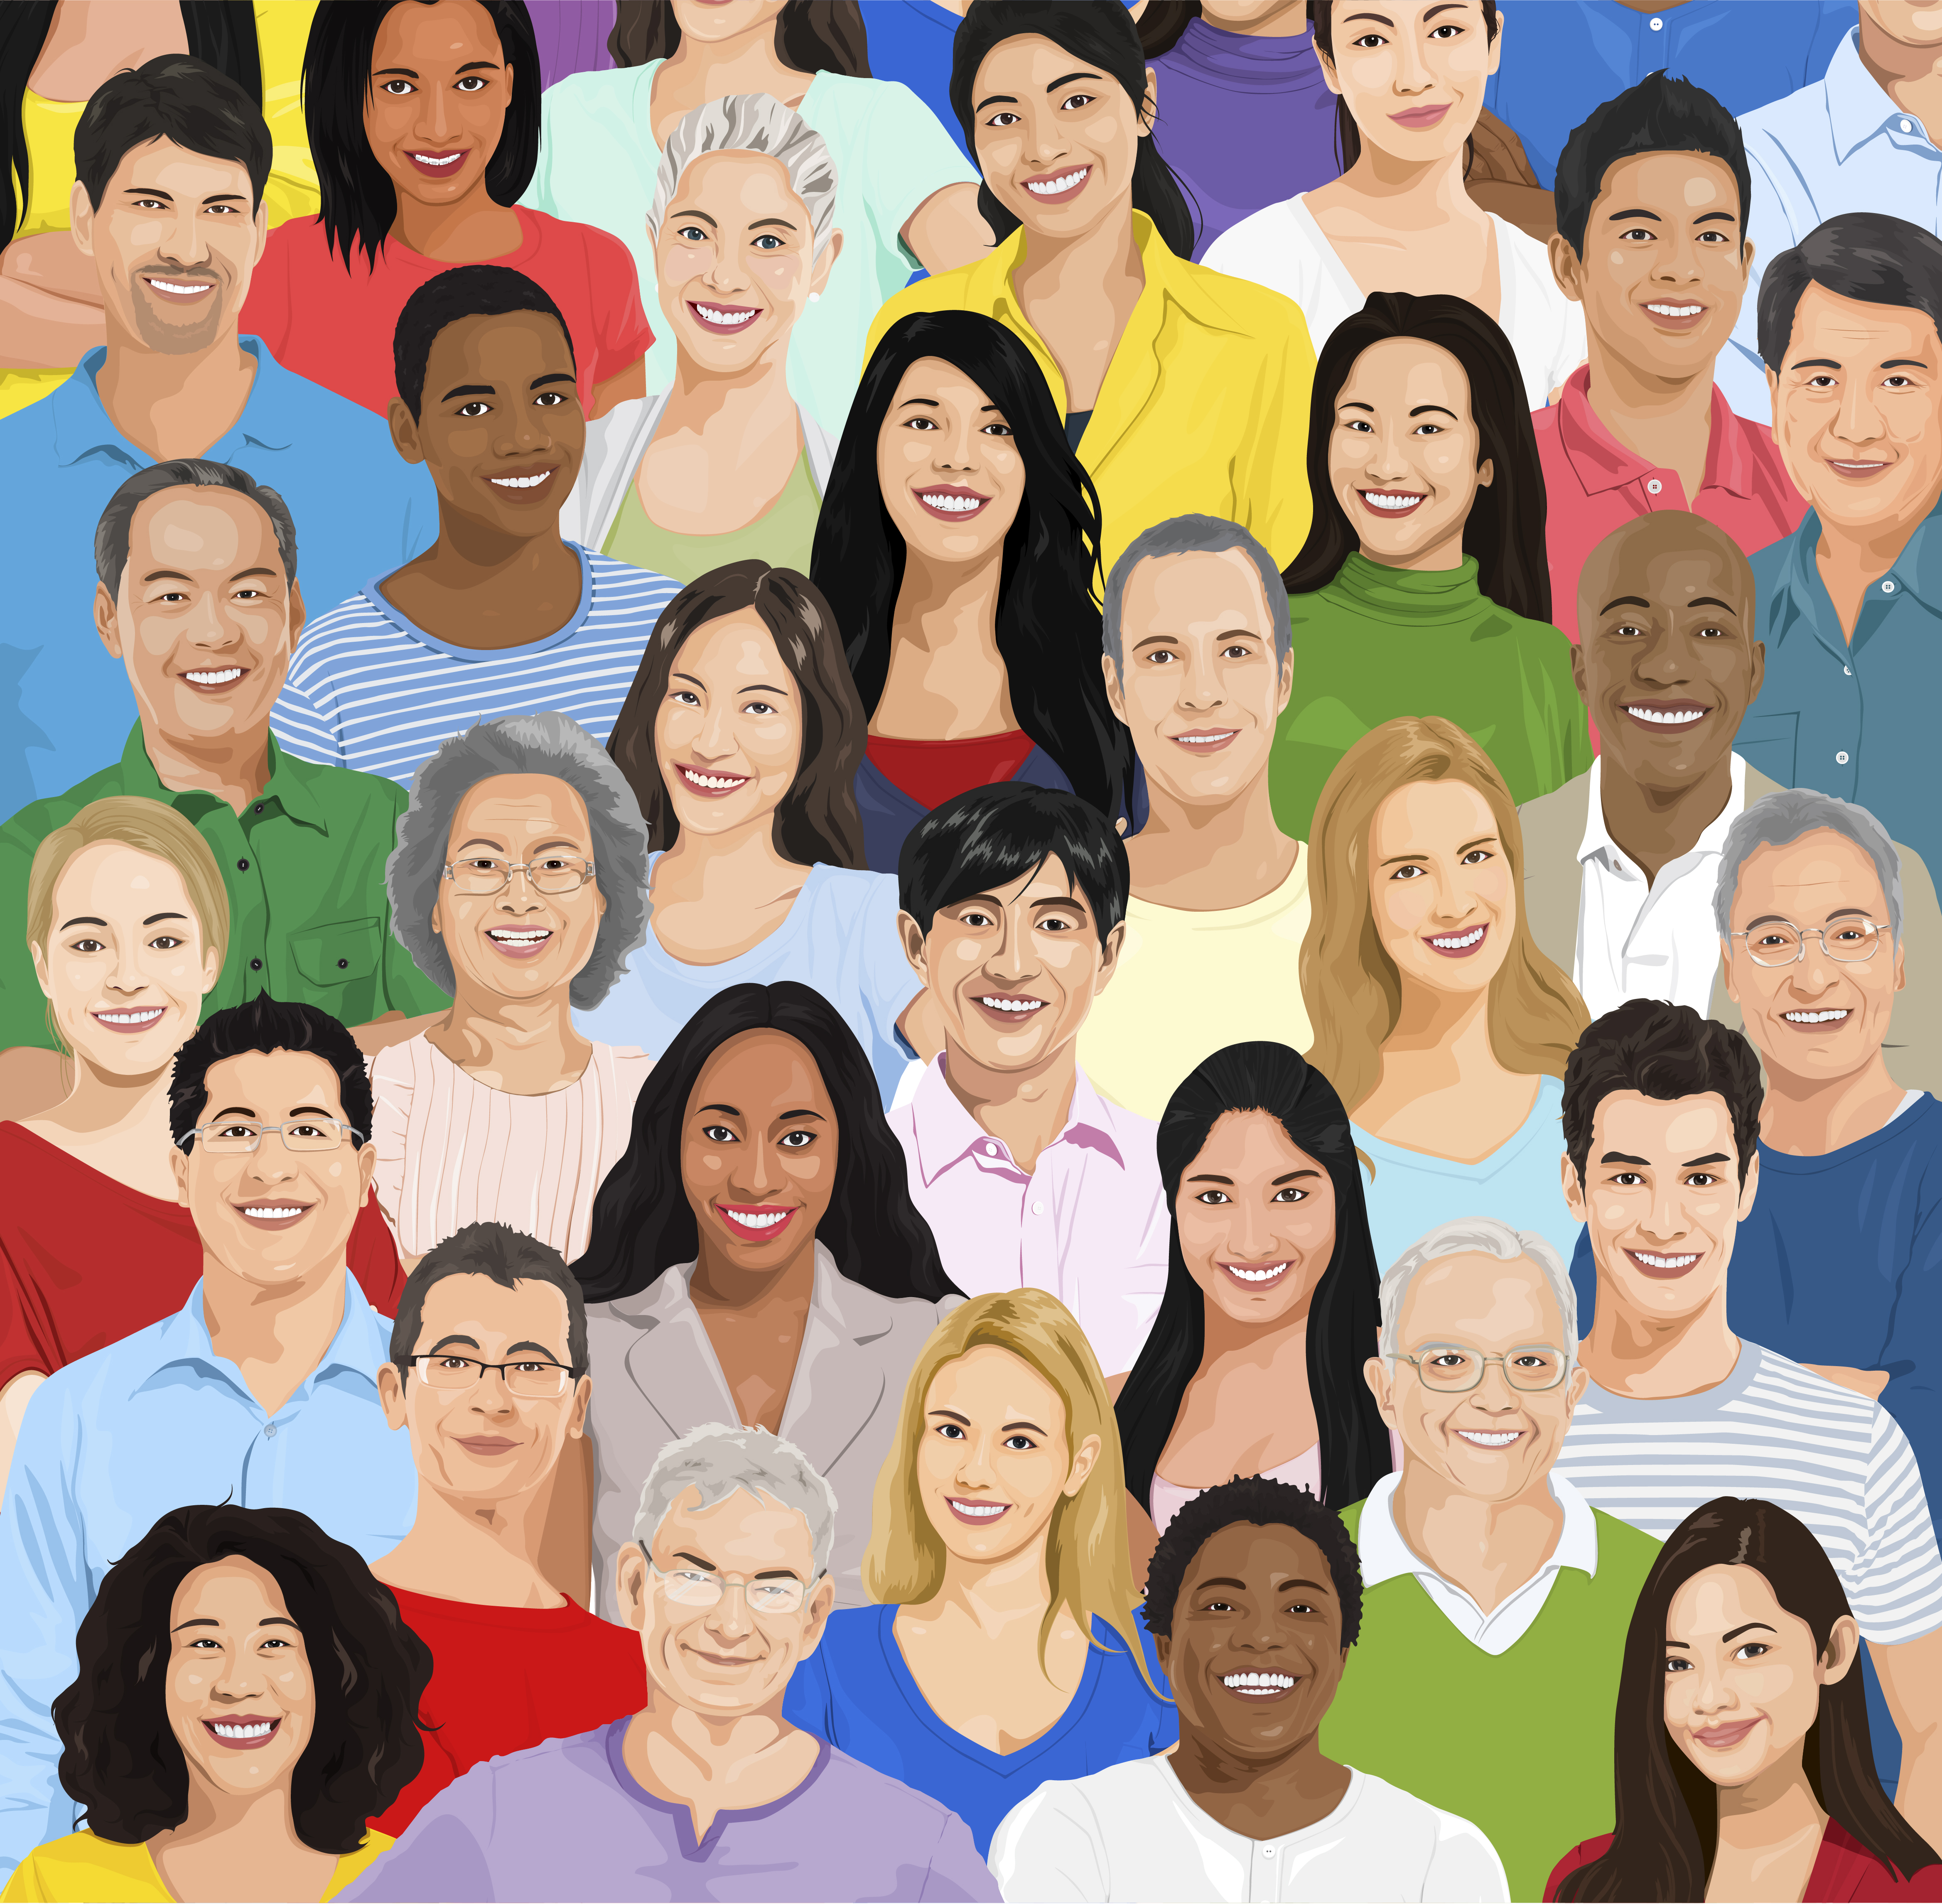 illustration-of-diverse-people-download-free-vectors-clipart